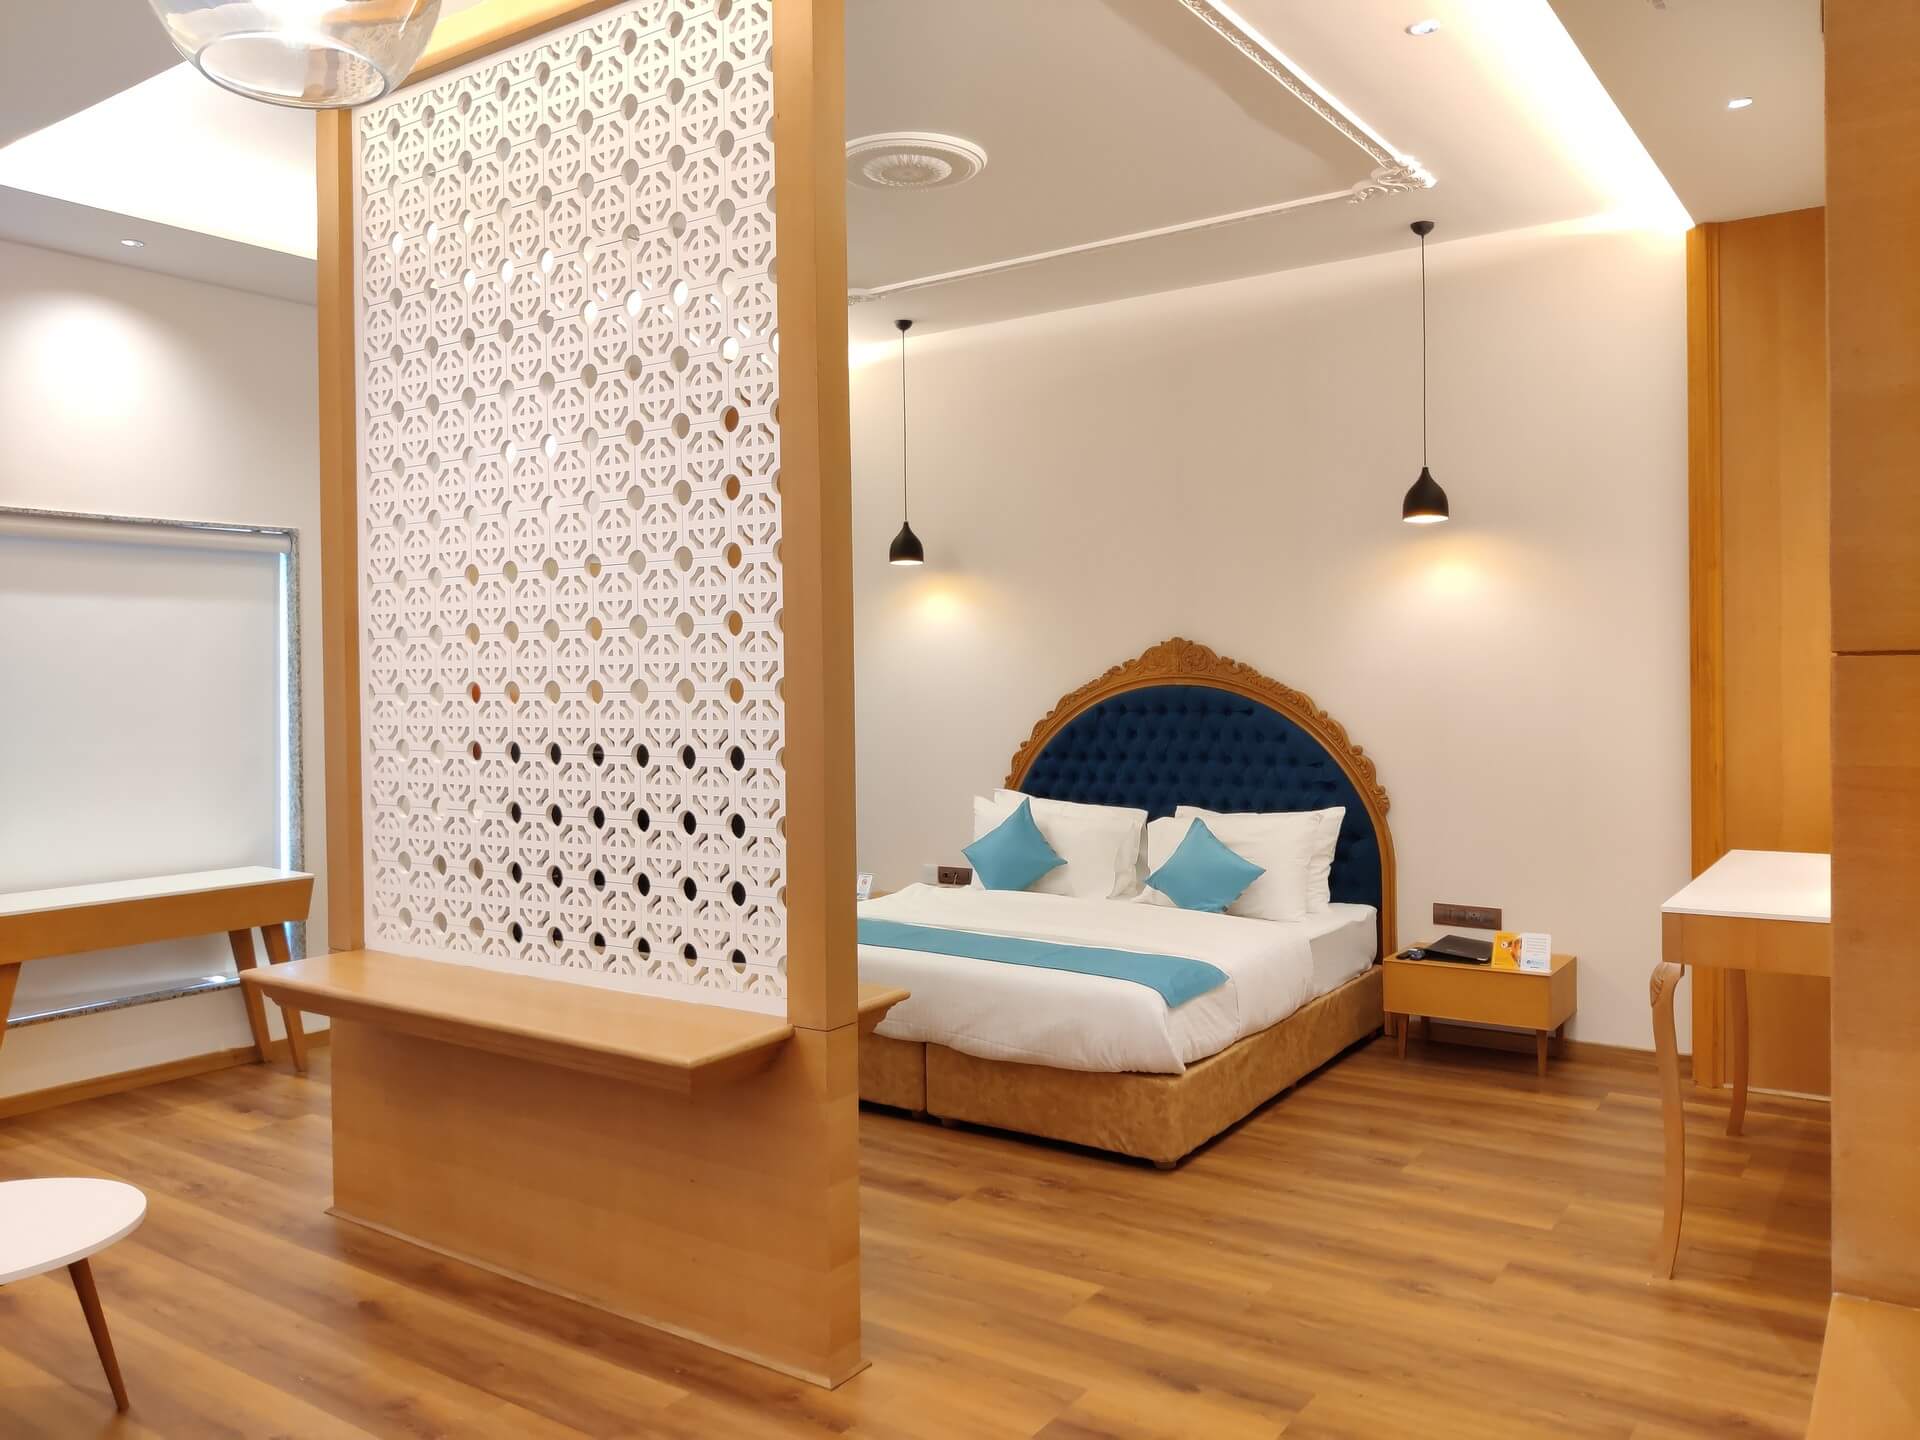 Rooms, Banquest & Conference Hall Packages and Best OFFER in anand at blueivy hotel